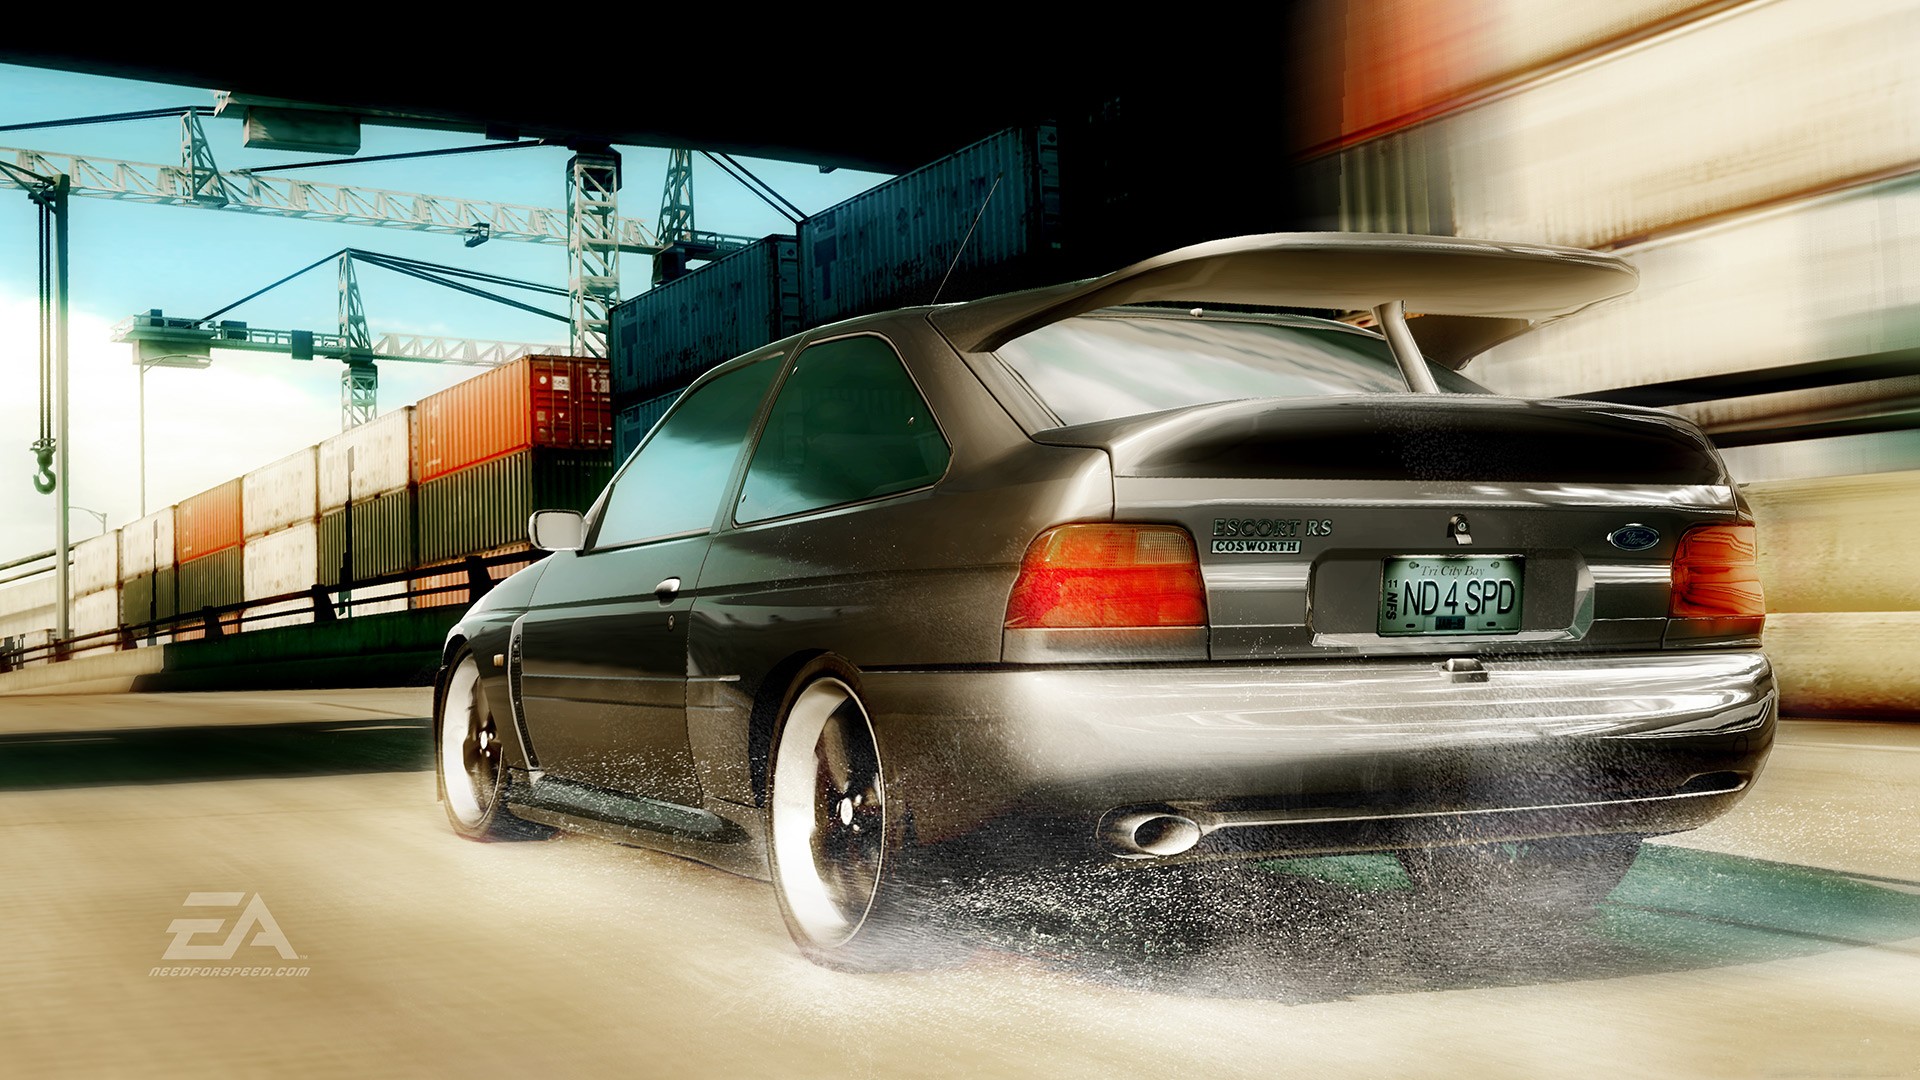 video games, cars, Need for Speed, Need For Speed Undercover, Ford Escort, games, pc games - desktop wallpaper